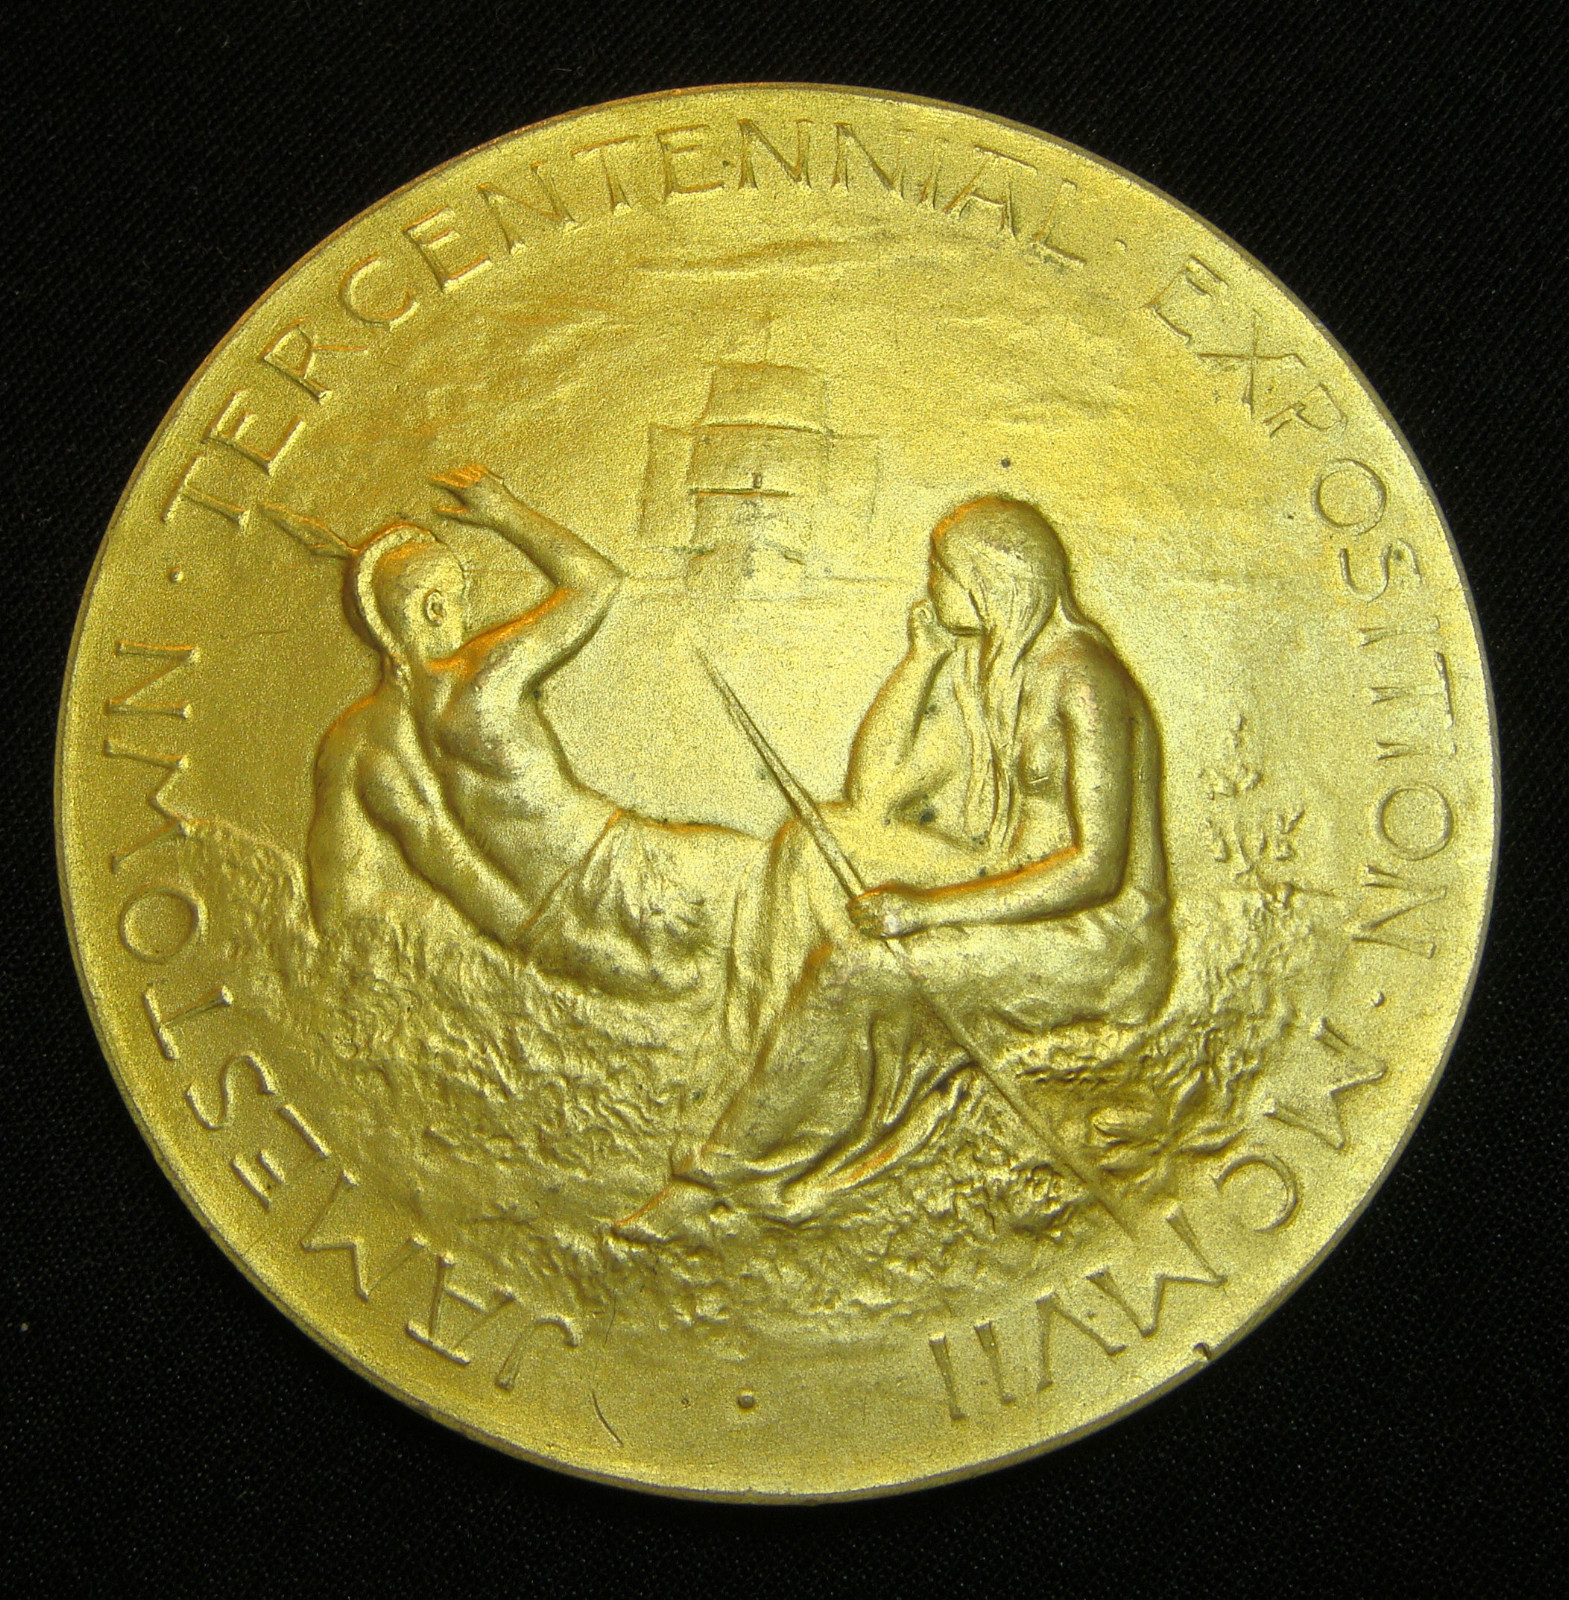 Top Collectible Medals from the 1907 Jamestown Exposition